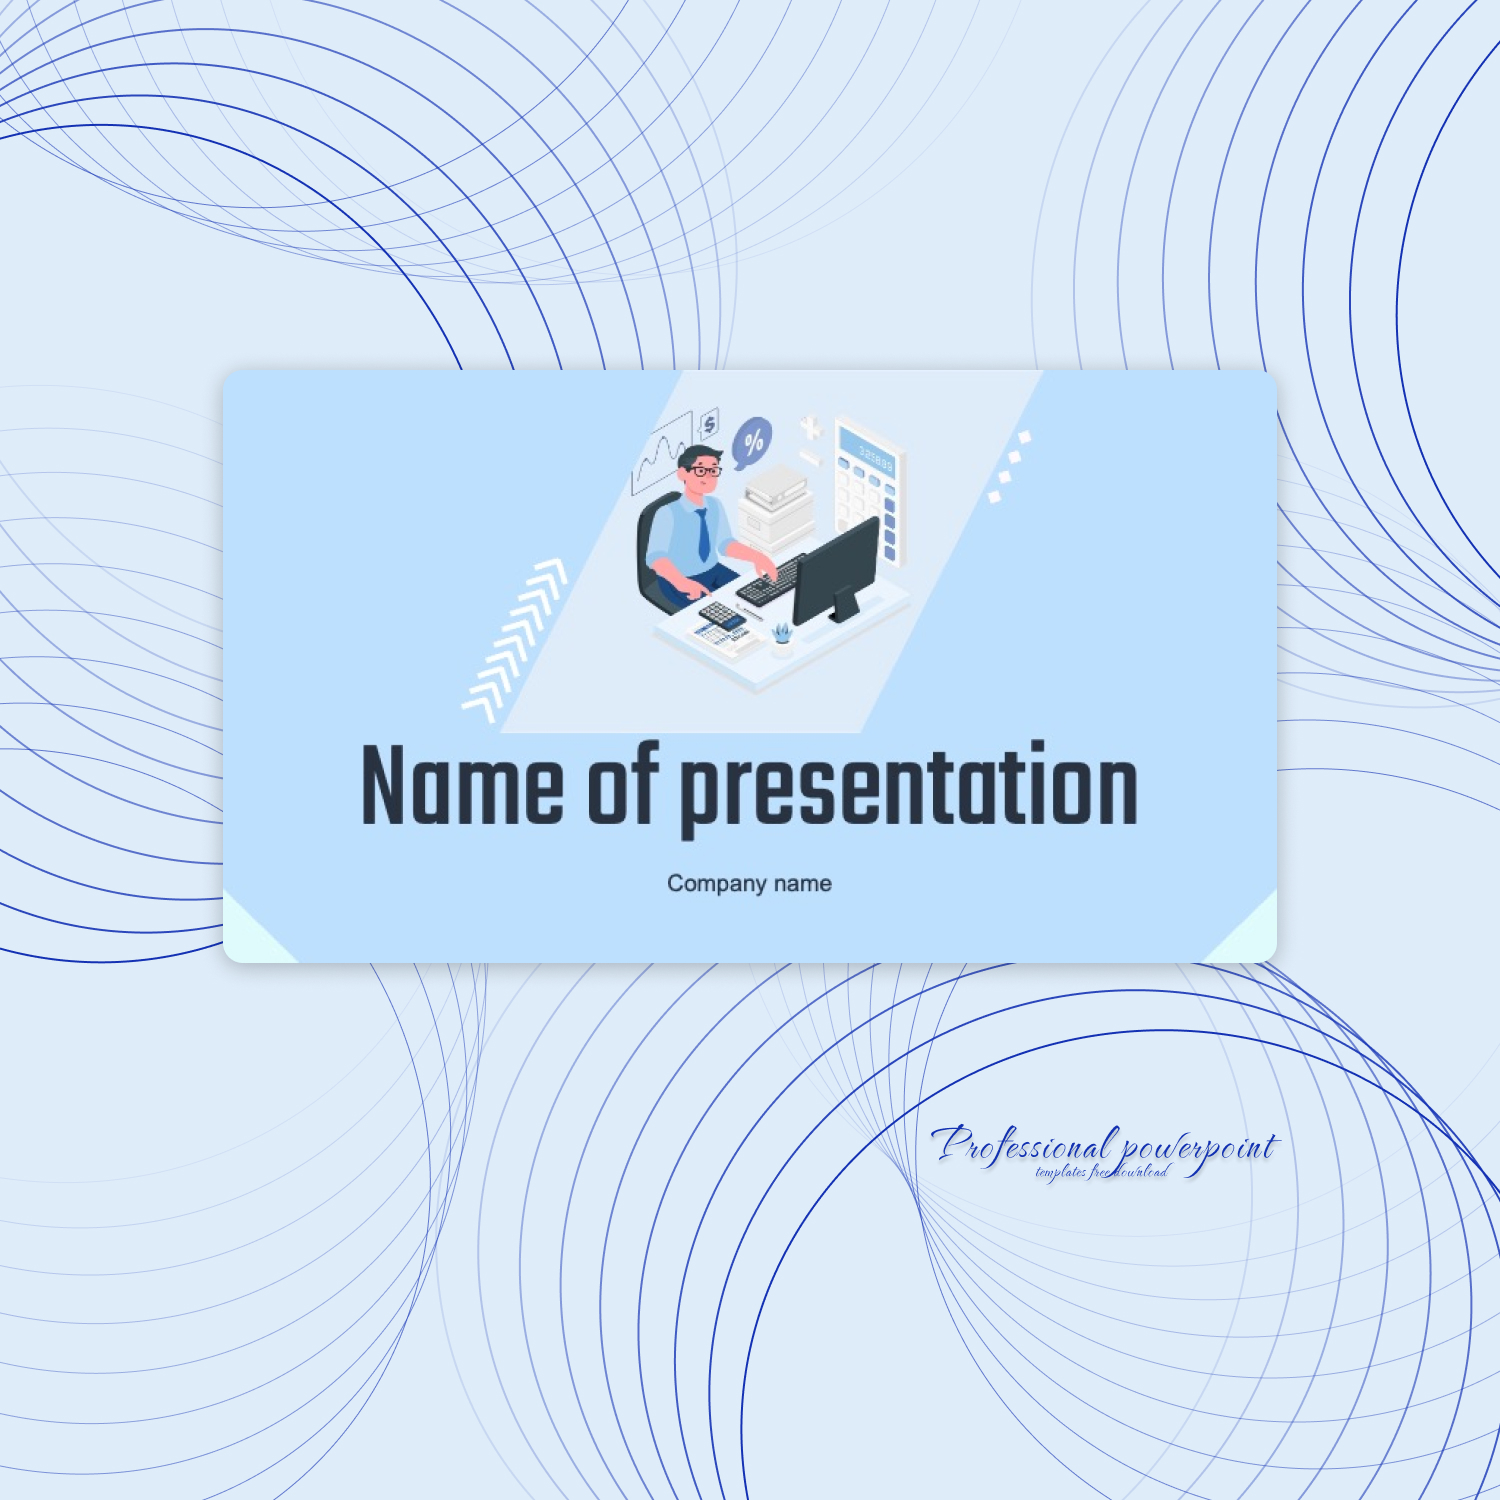 Prints of professional powerpoint templates free download.